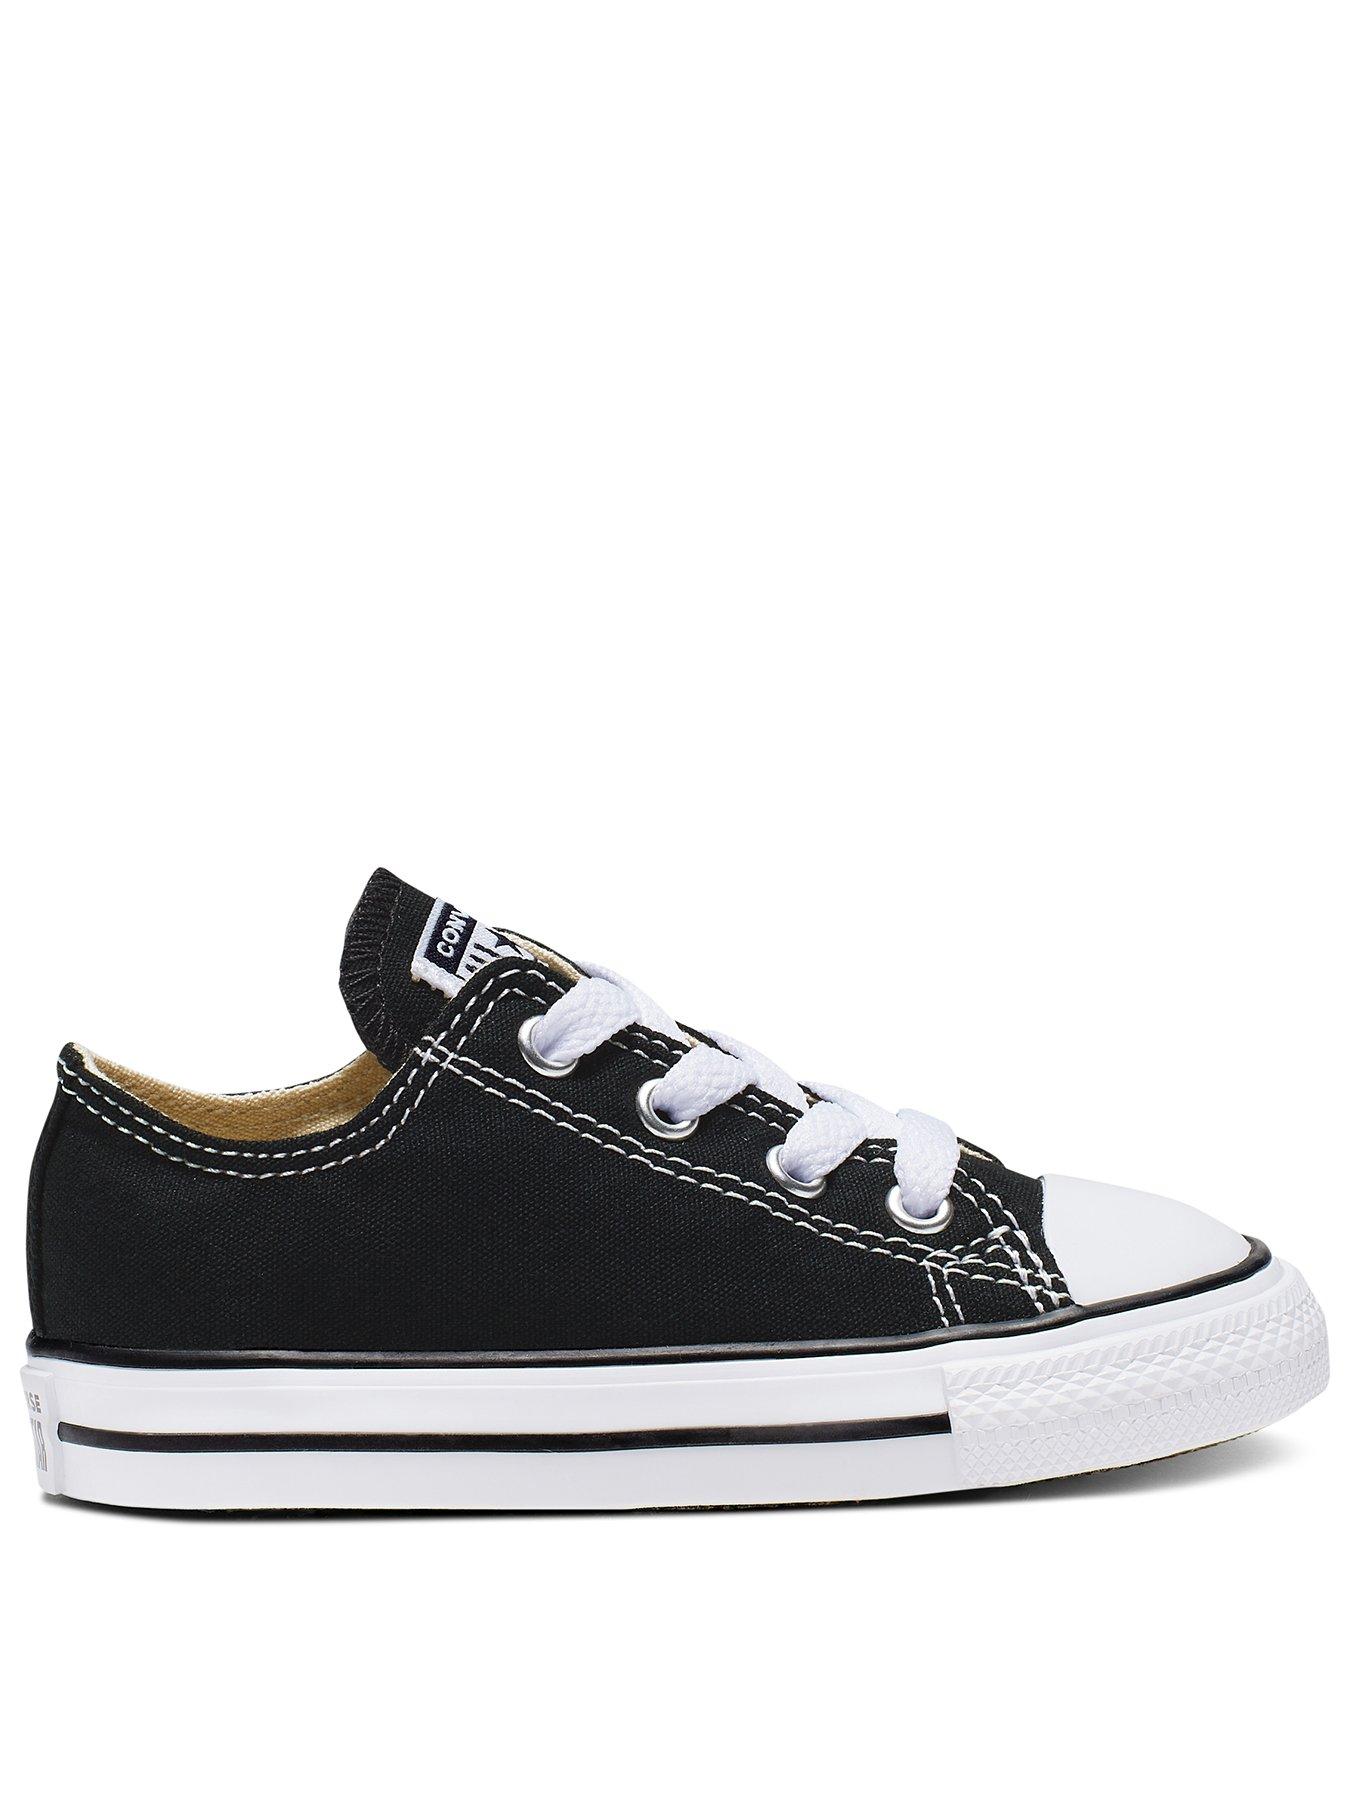 Converse Chuck Taylor All Star Infant Trainer - Black | very.co.uk